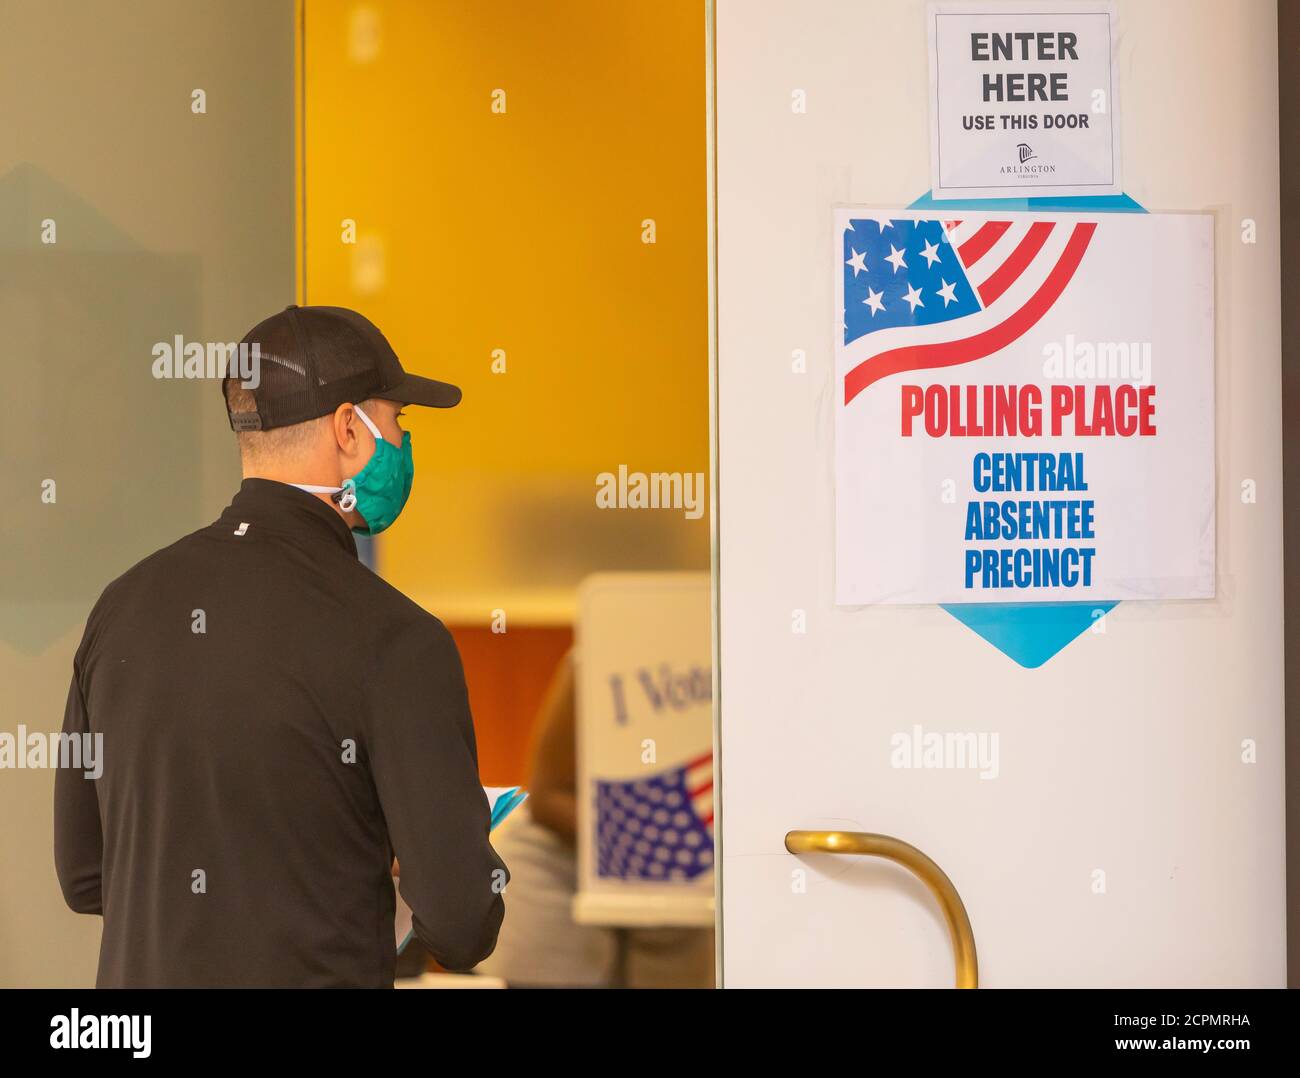 ARLINGTON, VIRGINIA, USA, SEPTEMBER 18, 2020 - Man enters polling place during first day of early voting, 2020 presidential election. Credit: ©Rob Crandall/Alamy Live News Stock Photo